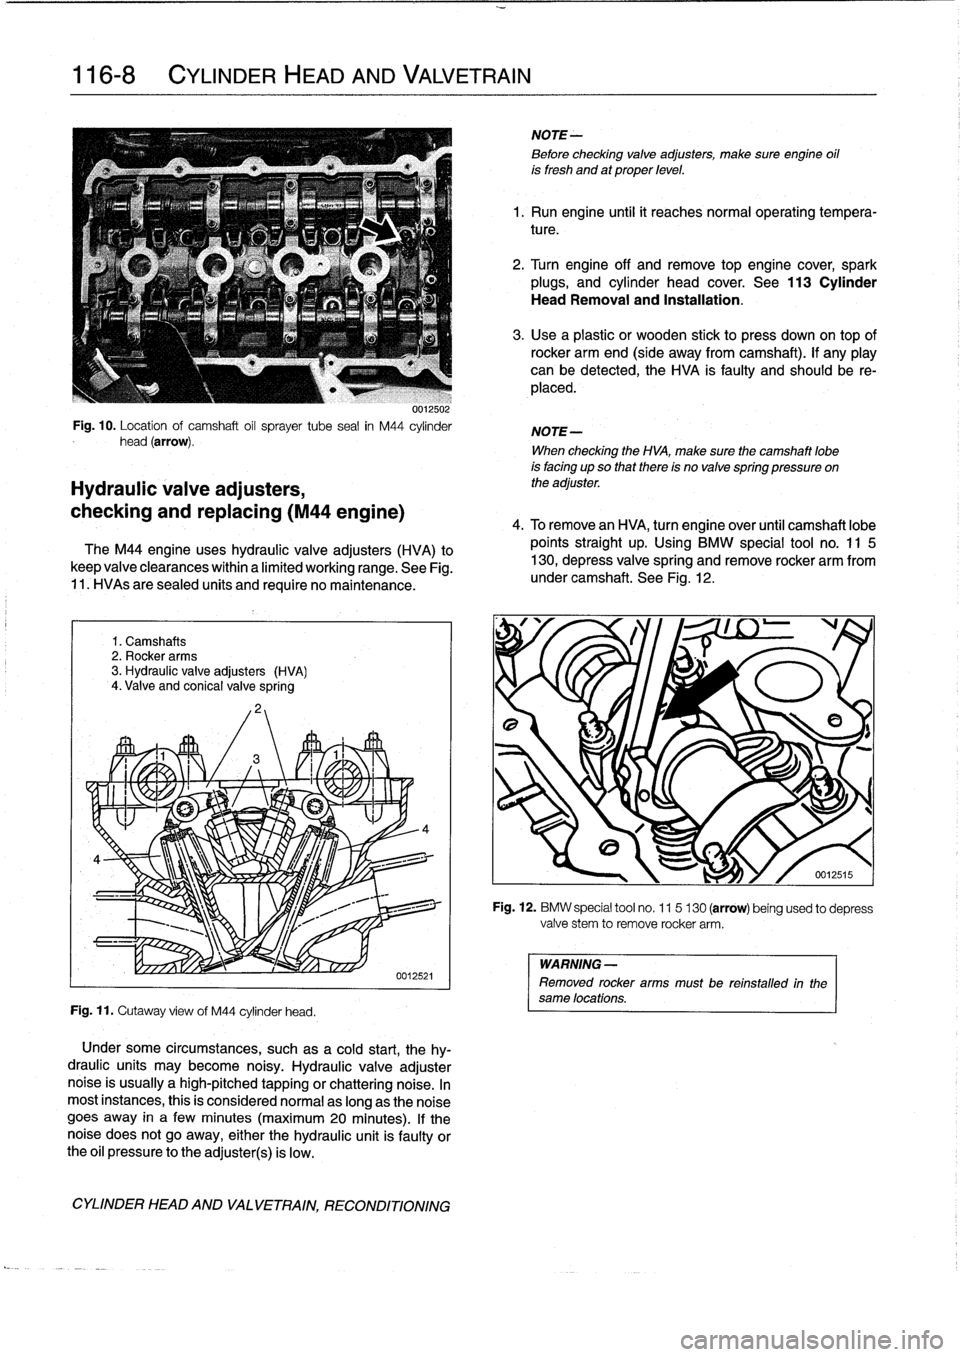 BMW 323i 1997 E36 Manual PDF 
116-
8

	

CYLINDER
HEAD
AND
VALVETRAIN

0012502

Fig
.
10
.
Location
of
camshaft
oil
sprayer
tube
sea¡
in
M44
cylinder
head
(arrow)
.

Hydraulic
valve
adjusters,

checking
and
replacing
(M44
engine